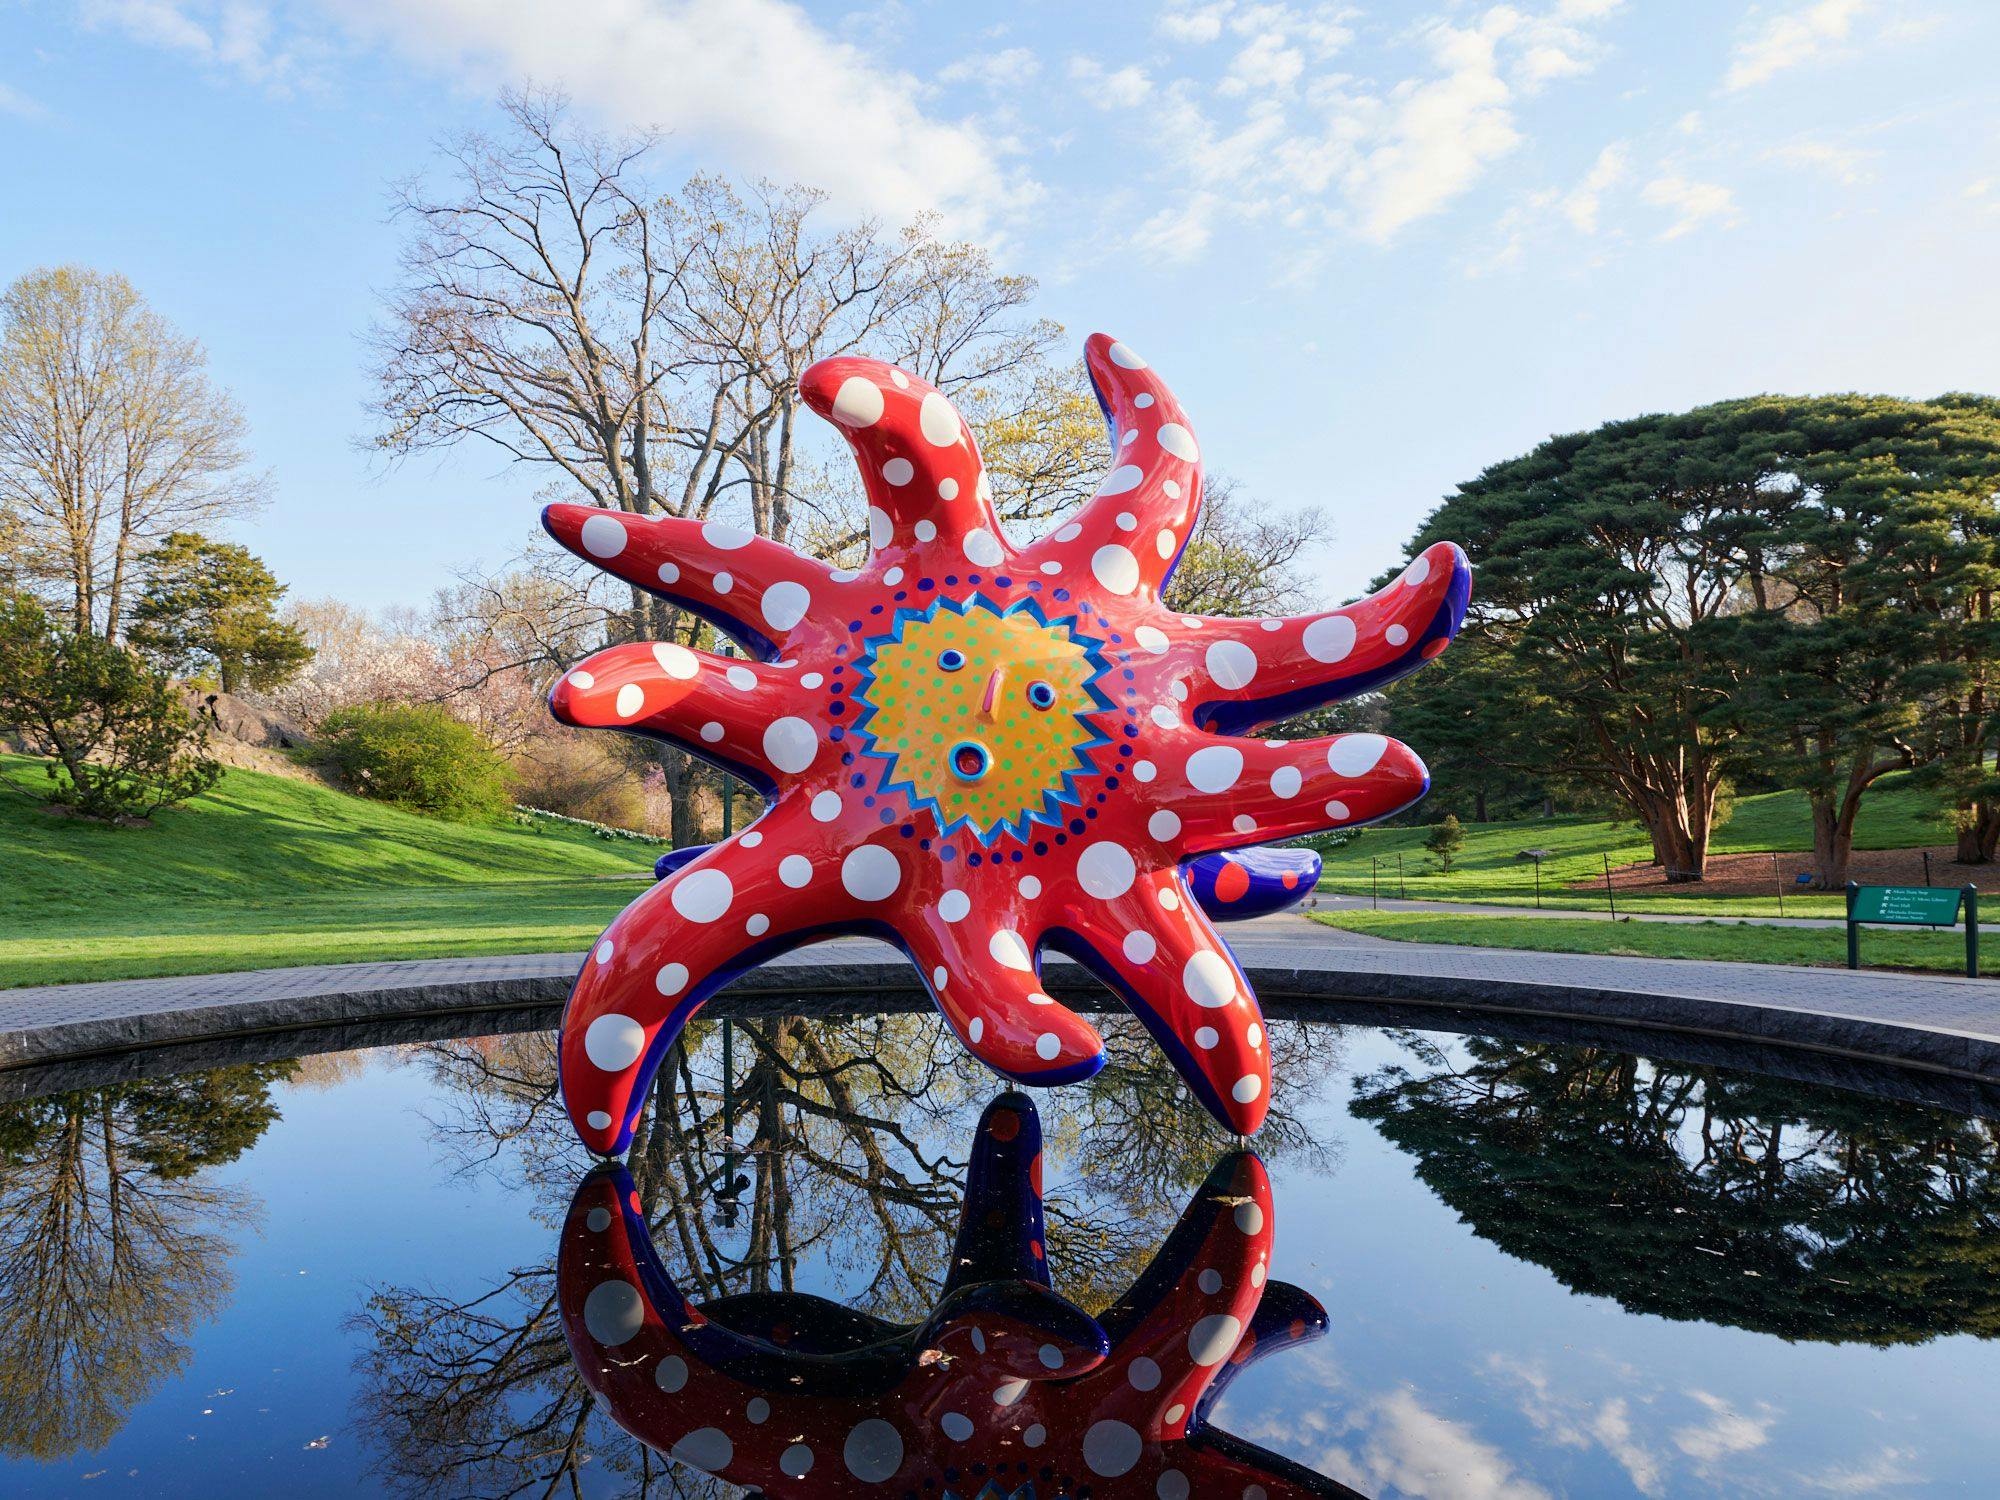 A sculpture by Yayoi Kusama, titled I Want to Fly to the Universe, dated 2020.